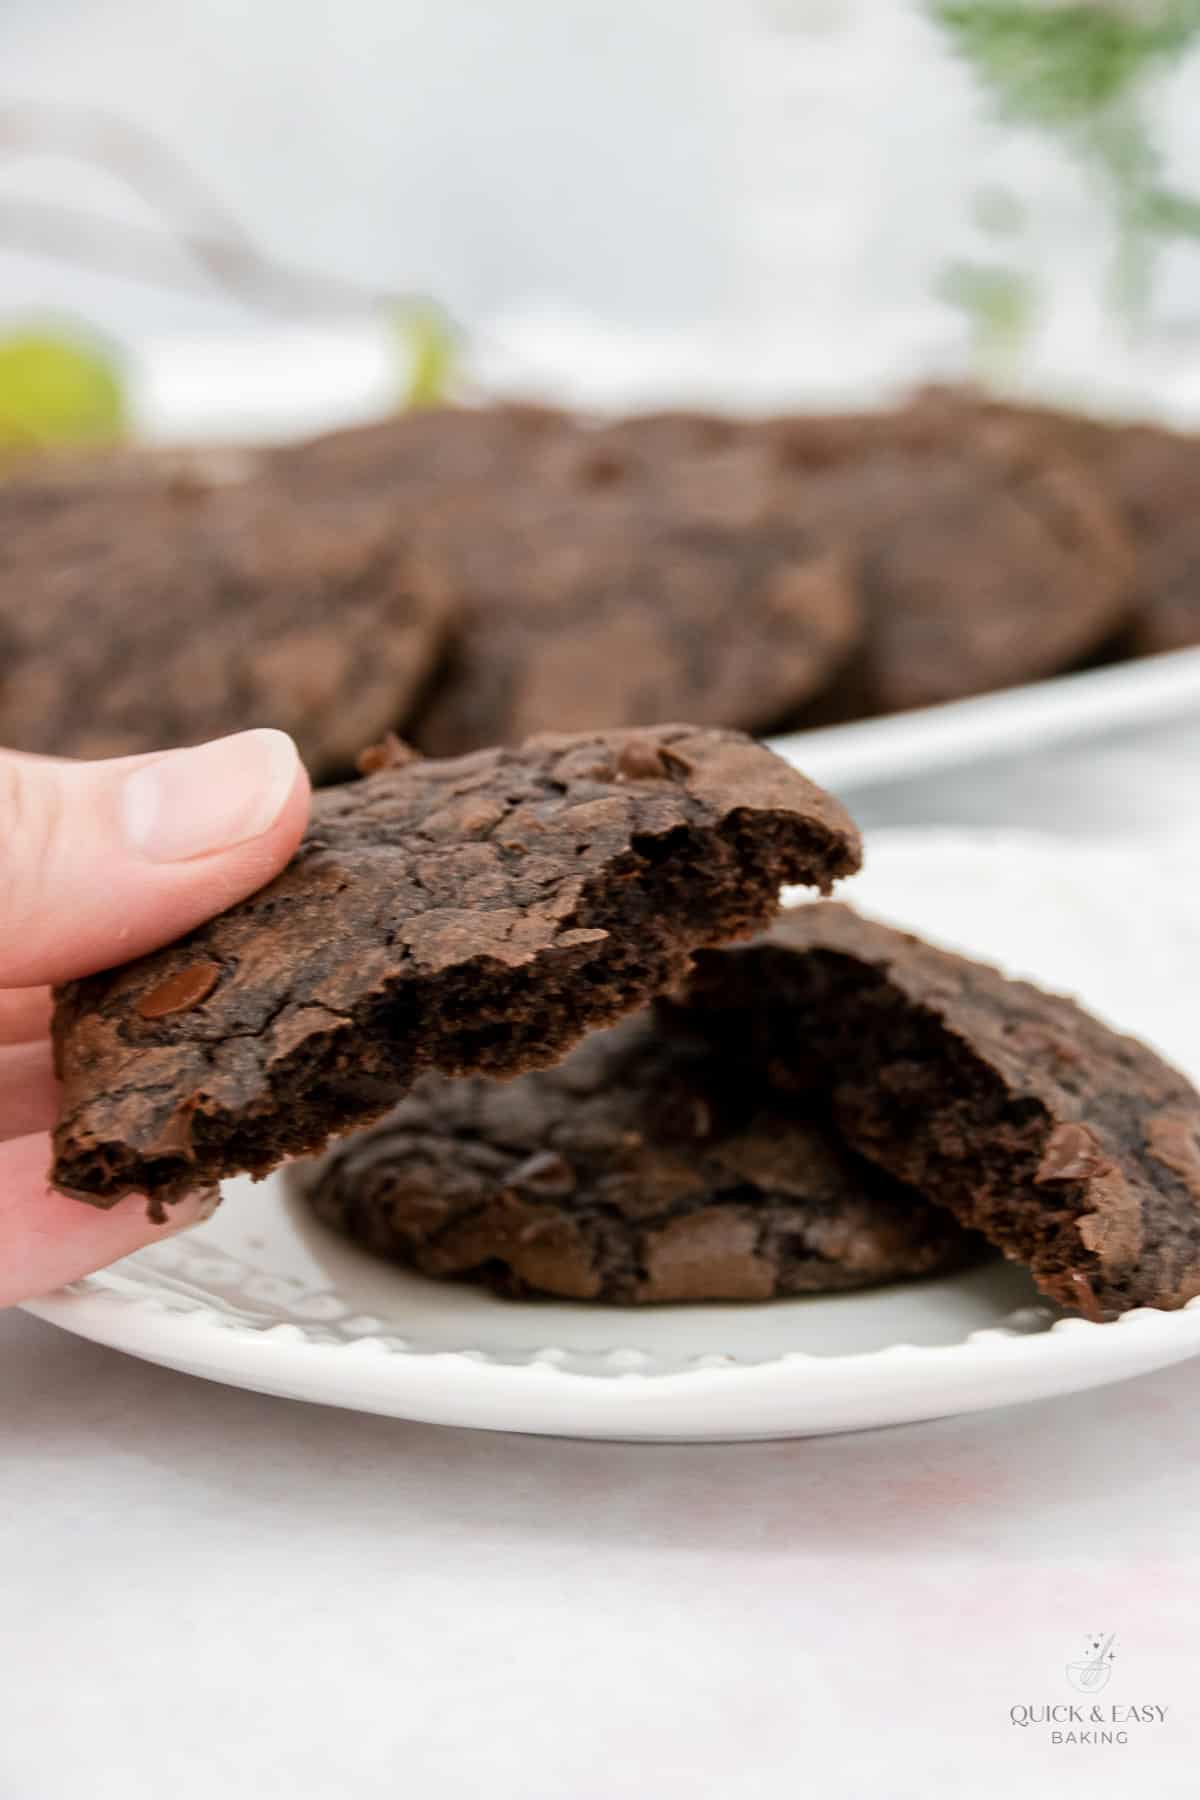 Hand holding a brownie cookie with cookies in the background.